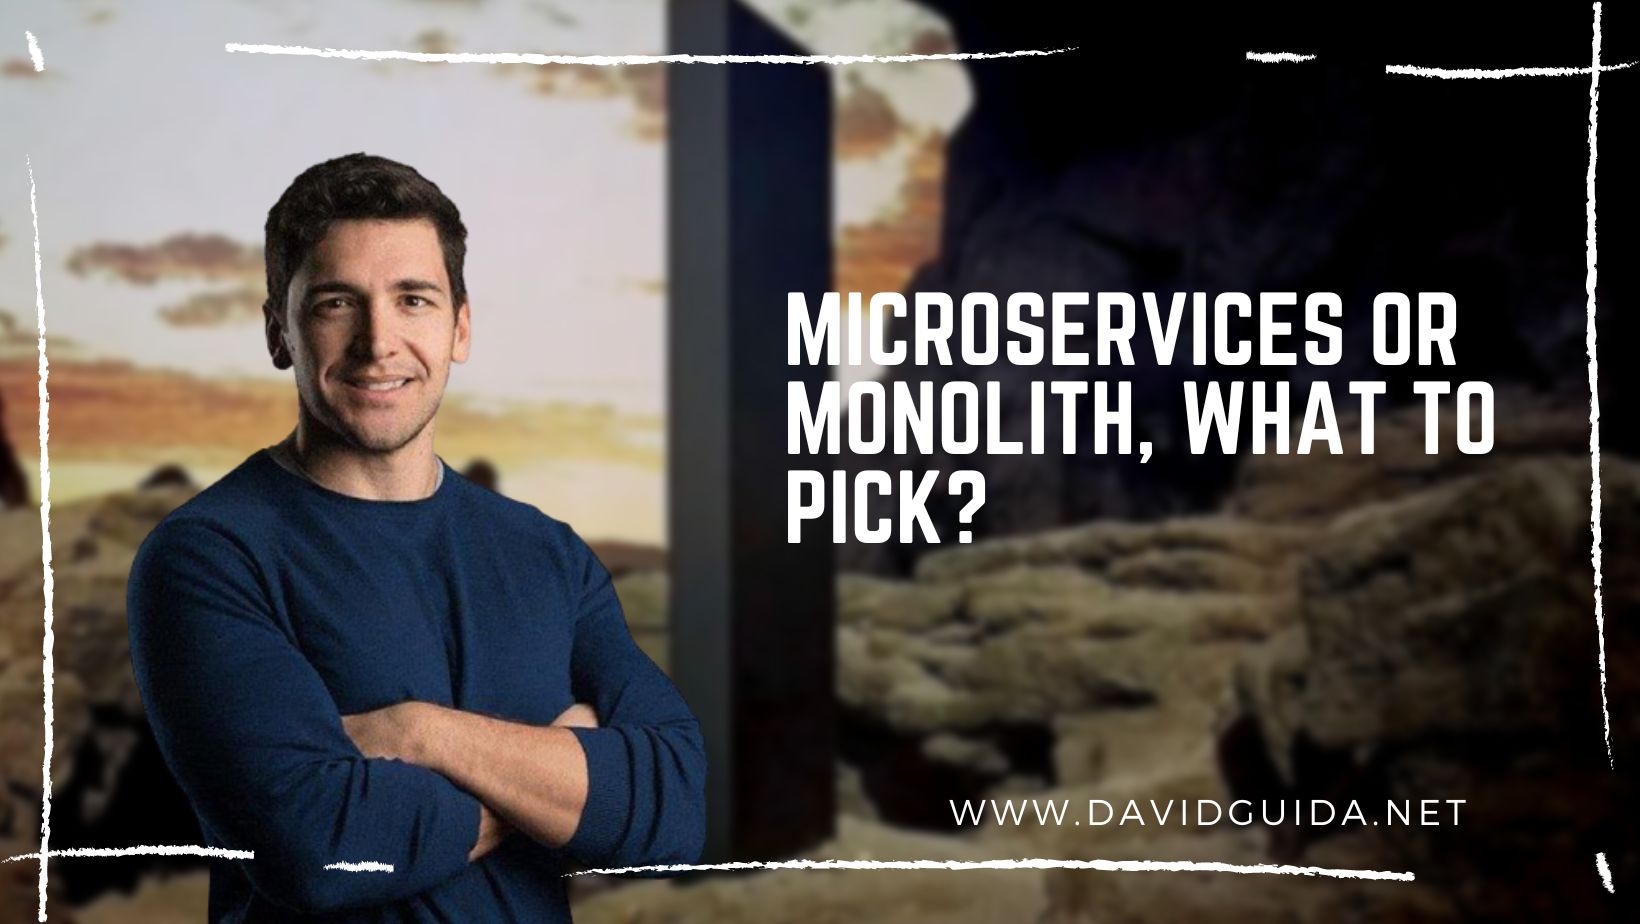 Microservices or Monolith, what to pick?